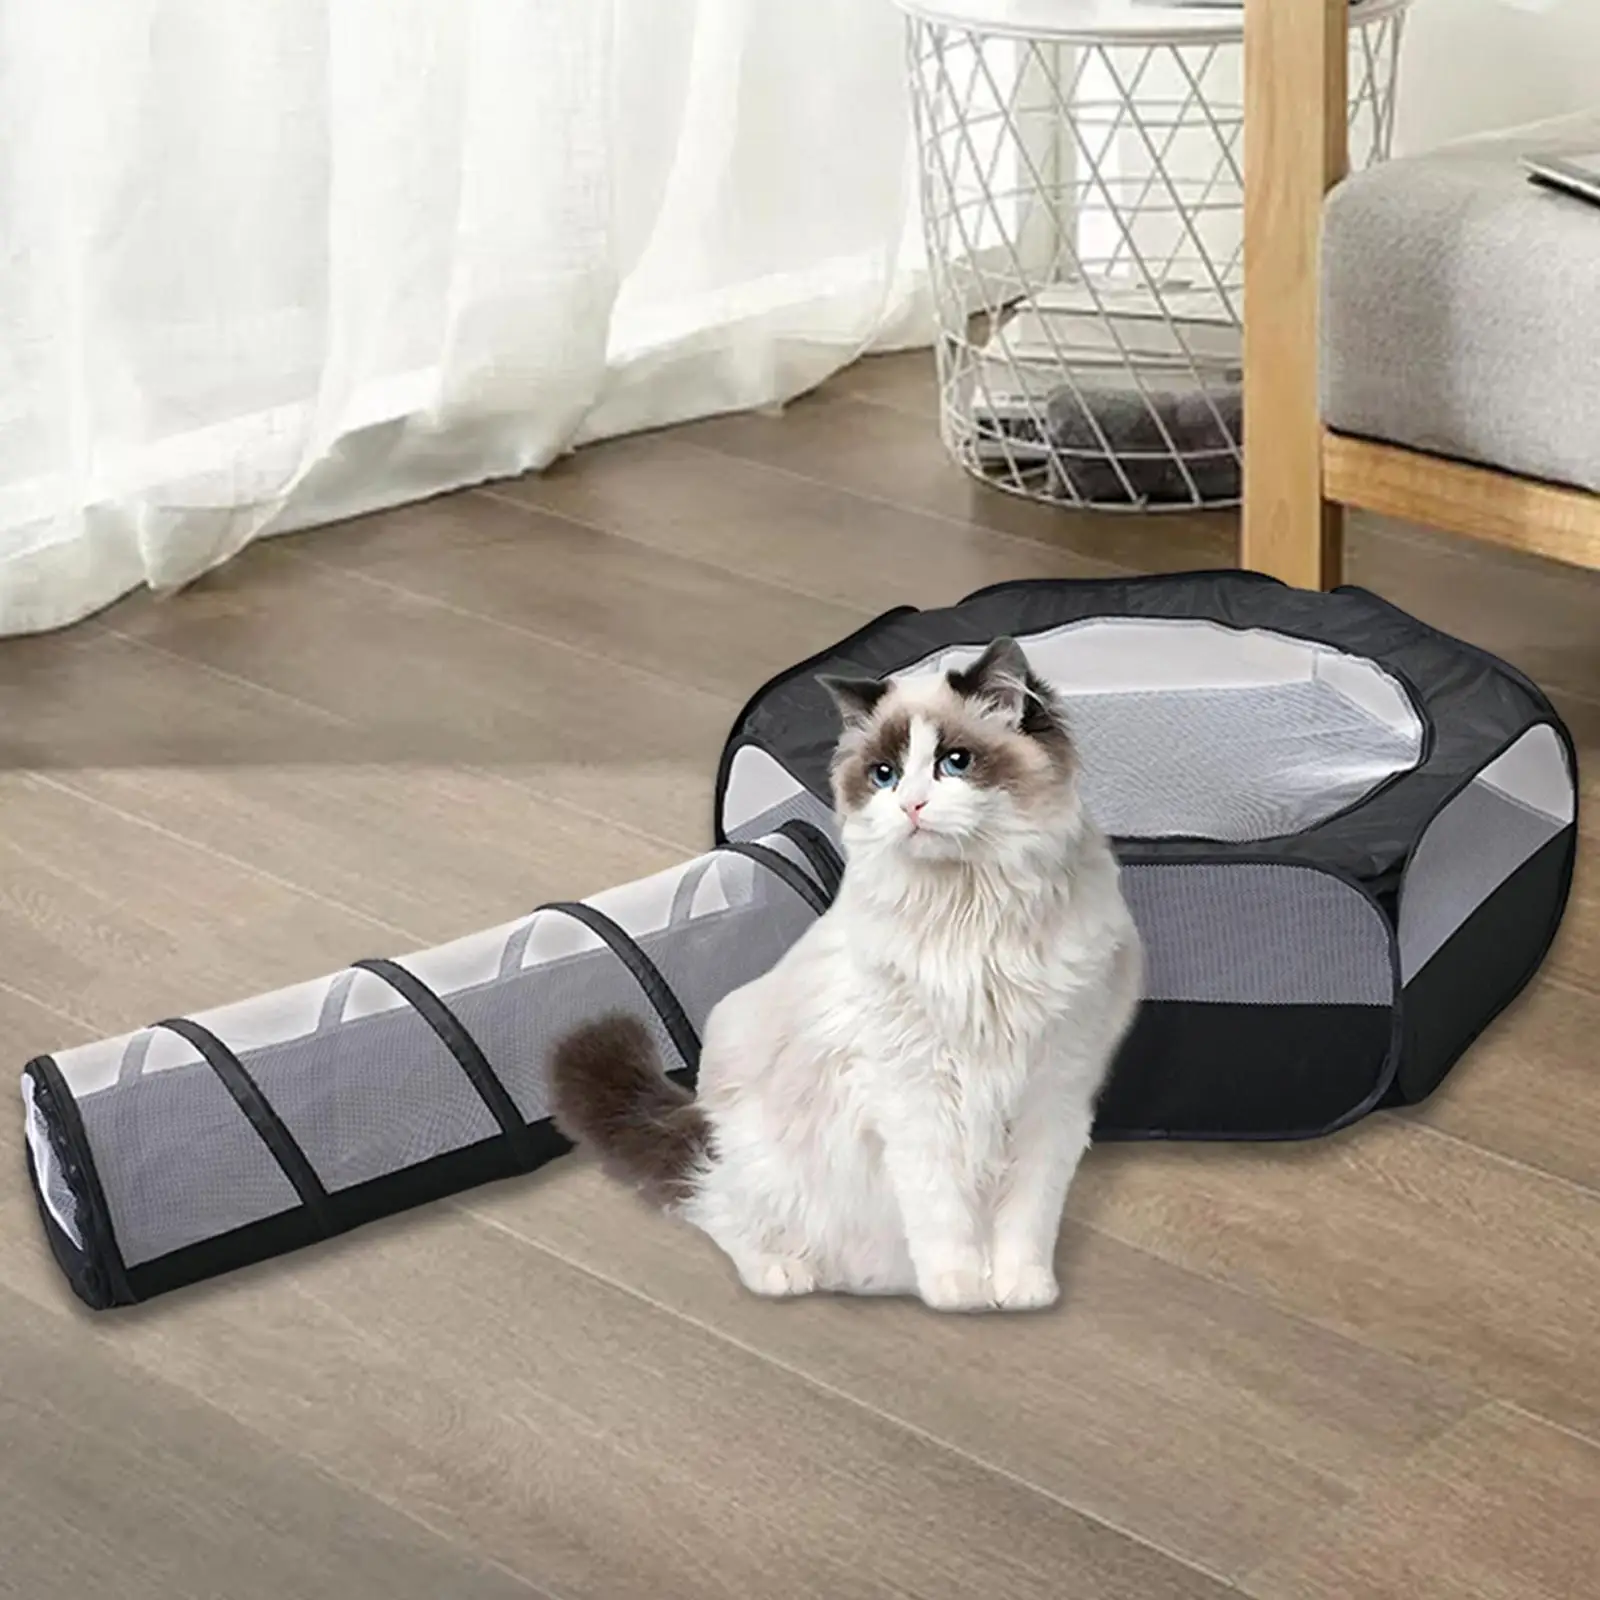 Cat Tunnel Indoor Cats 2 in 1 Cage Folded Tunnel Cat Toy Outside House for Indoor Cats for Ferrets Kitten Hamster Rabbit Rabbits